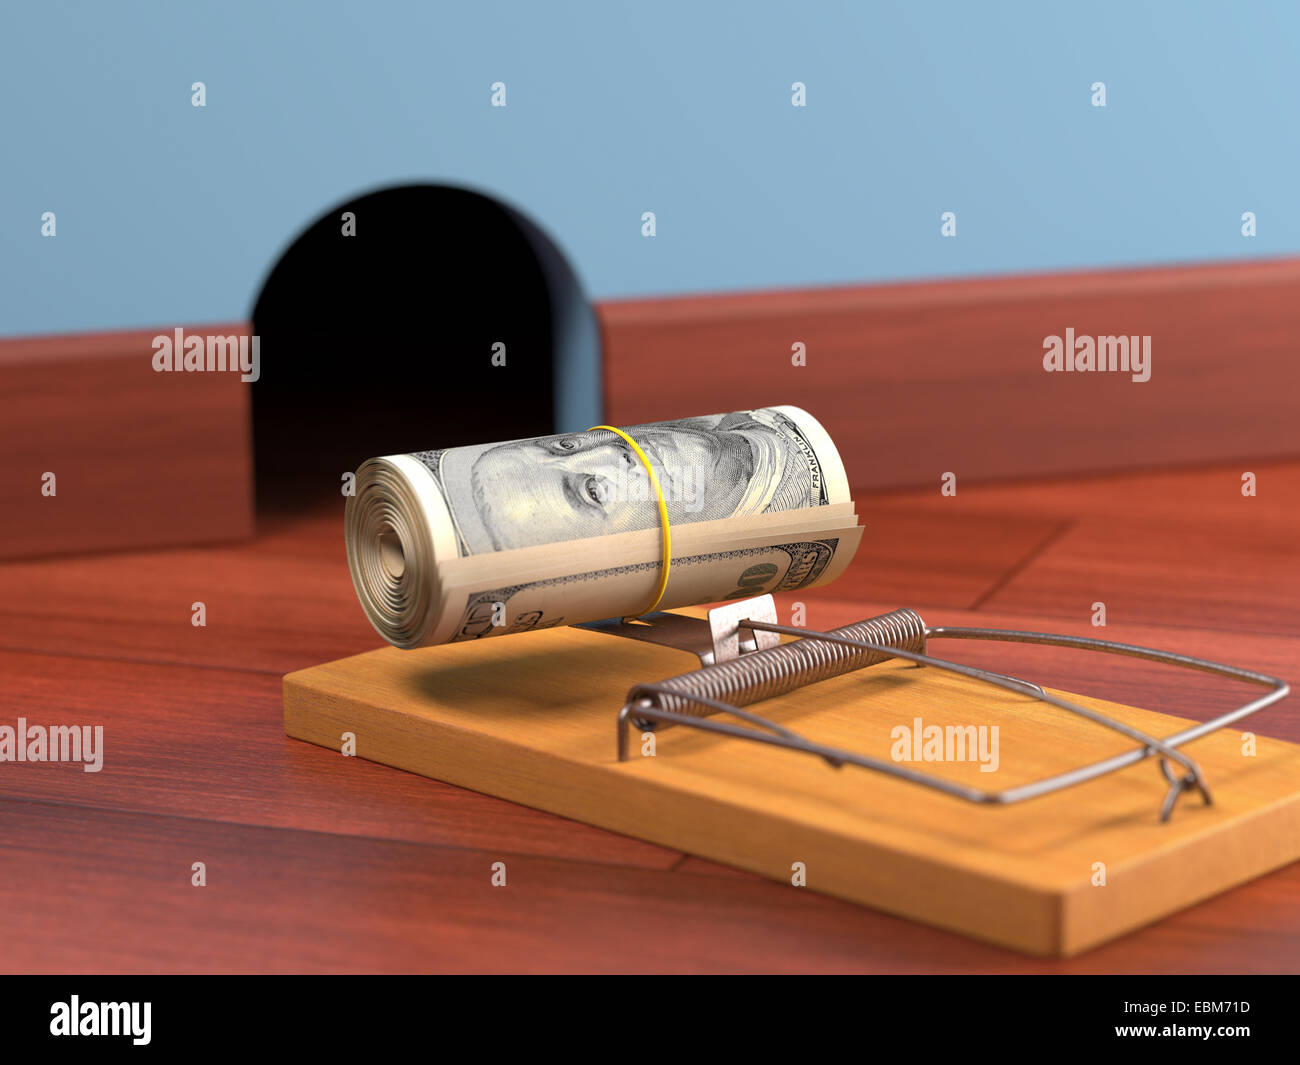 Wad of cash as bait in a trap. Depth of field. Stock Photo